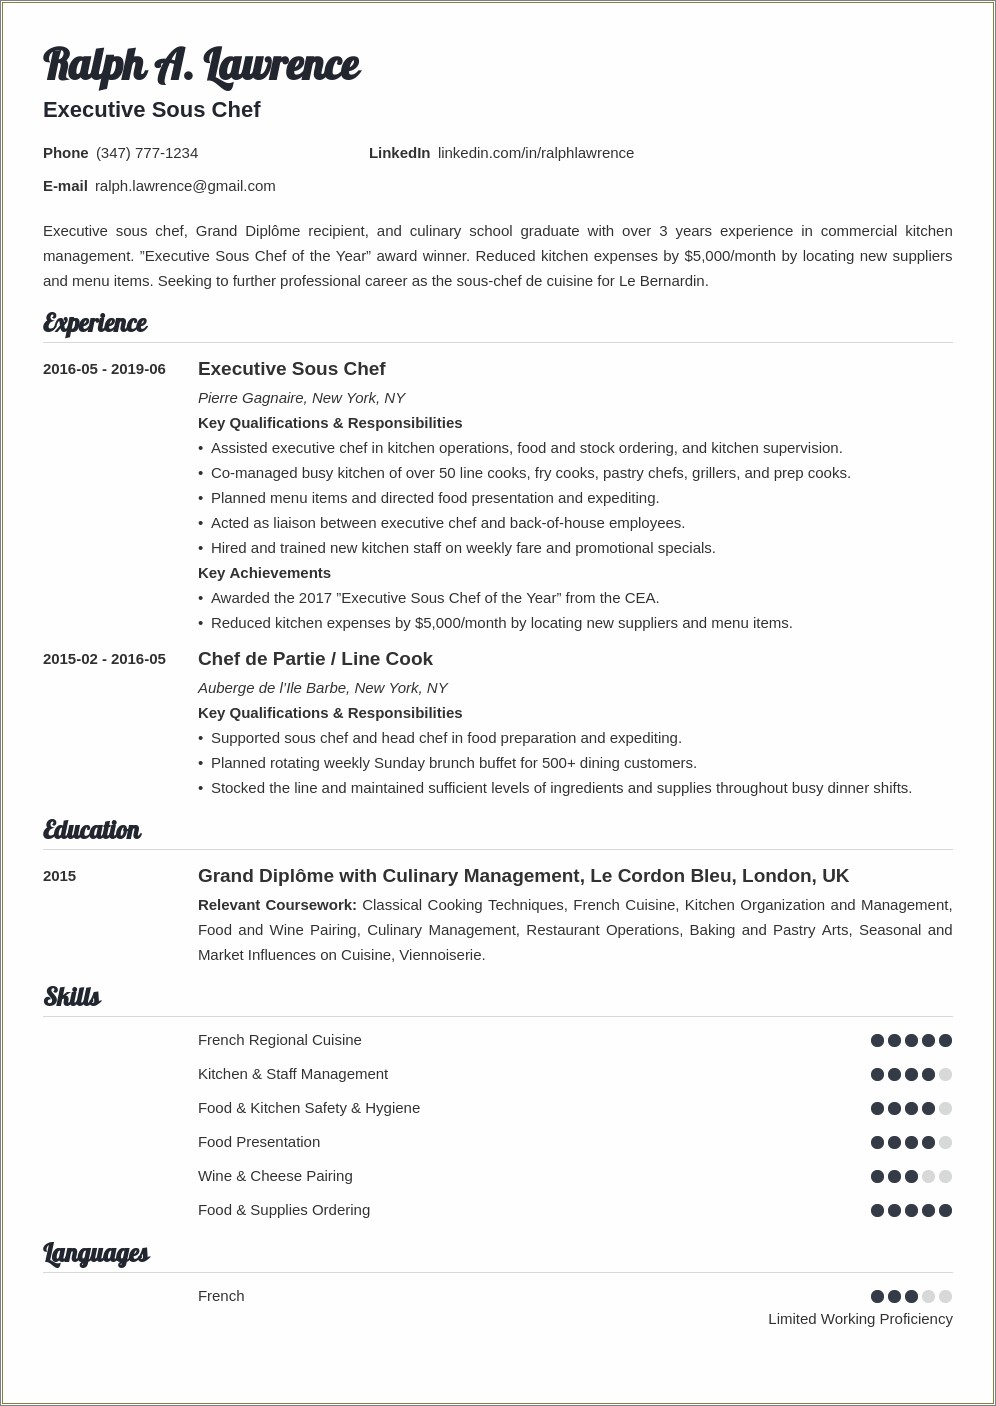 Resume Objective Statement For Chef